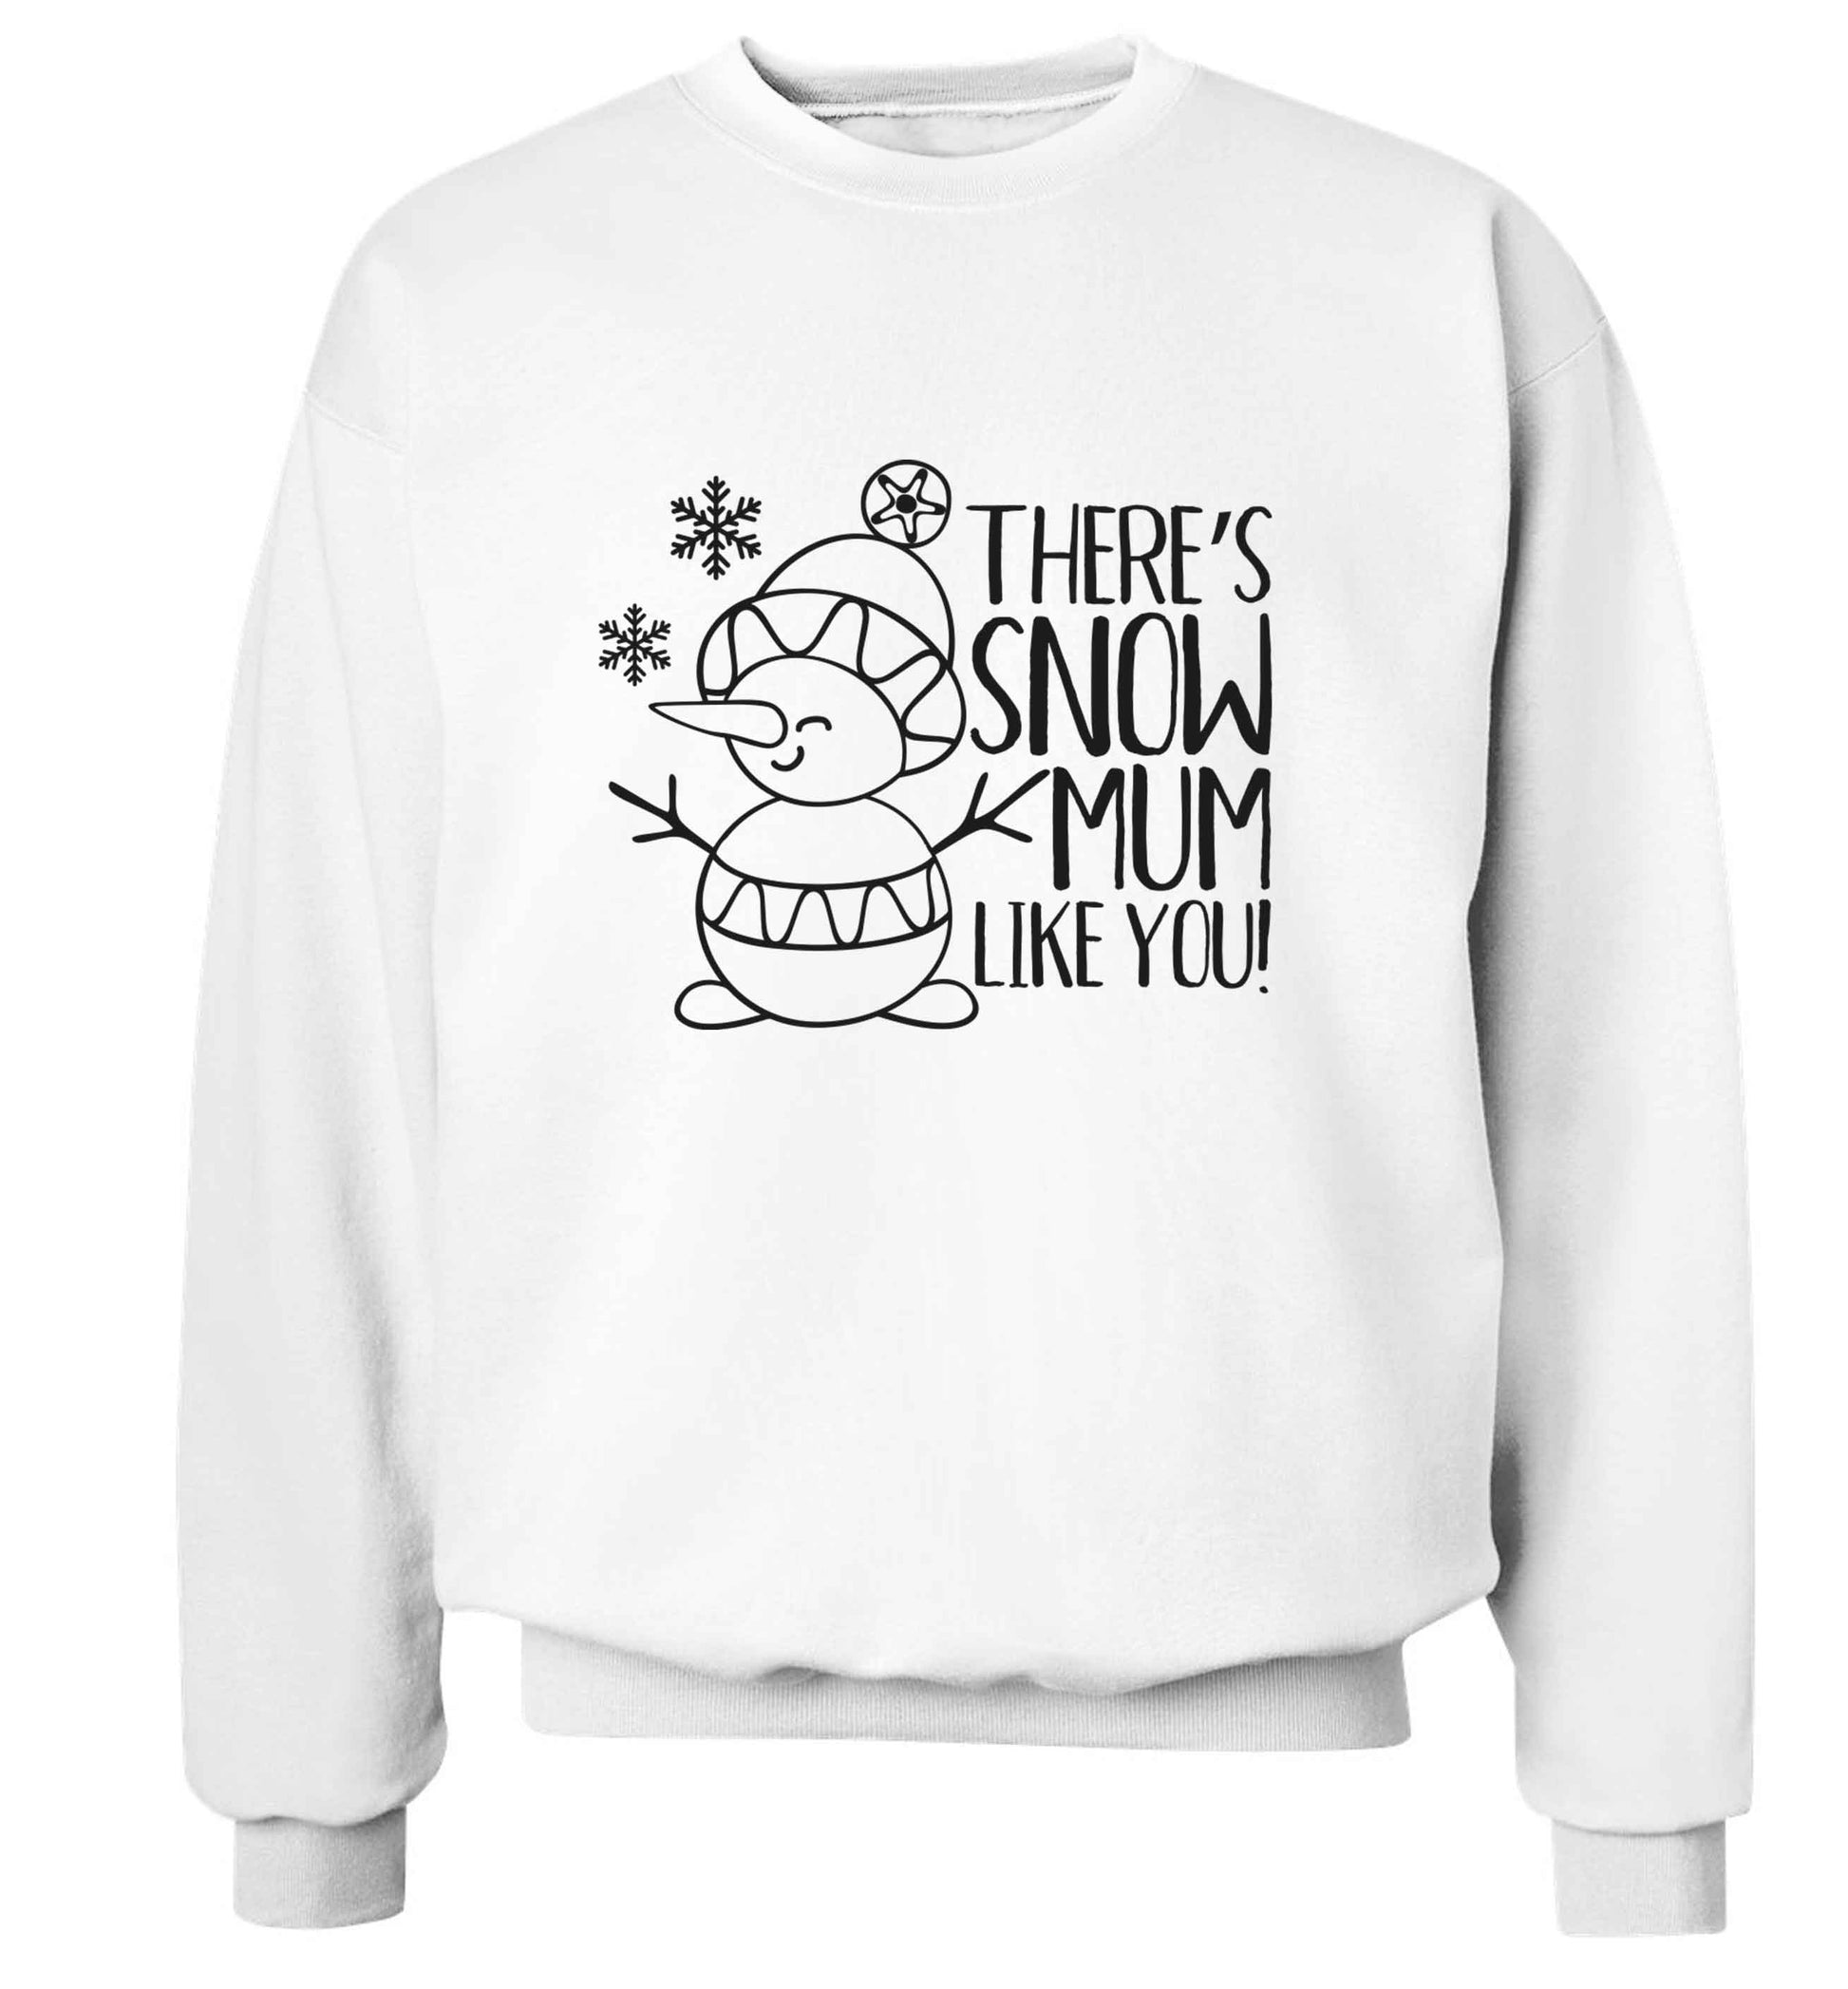 There's snow mum like you adult's unisex white sweater 2XL